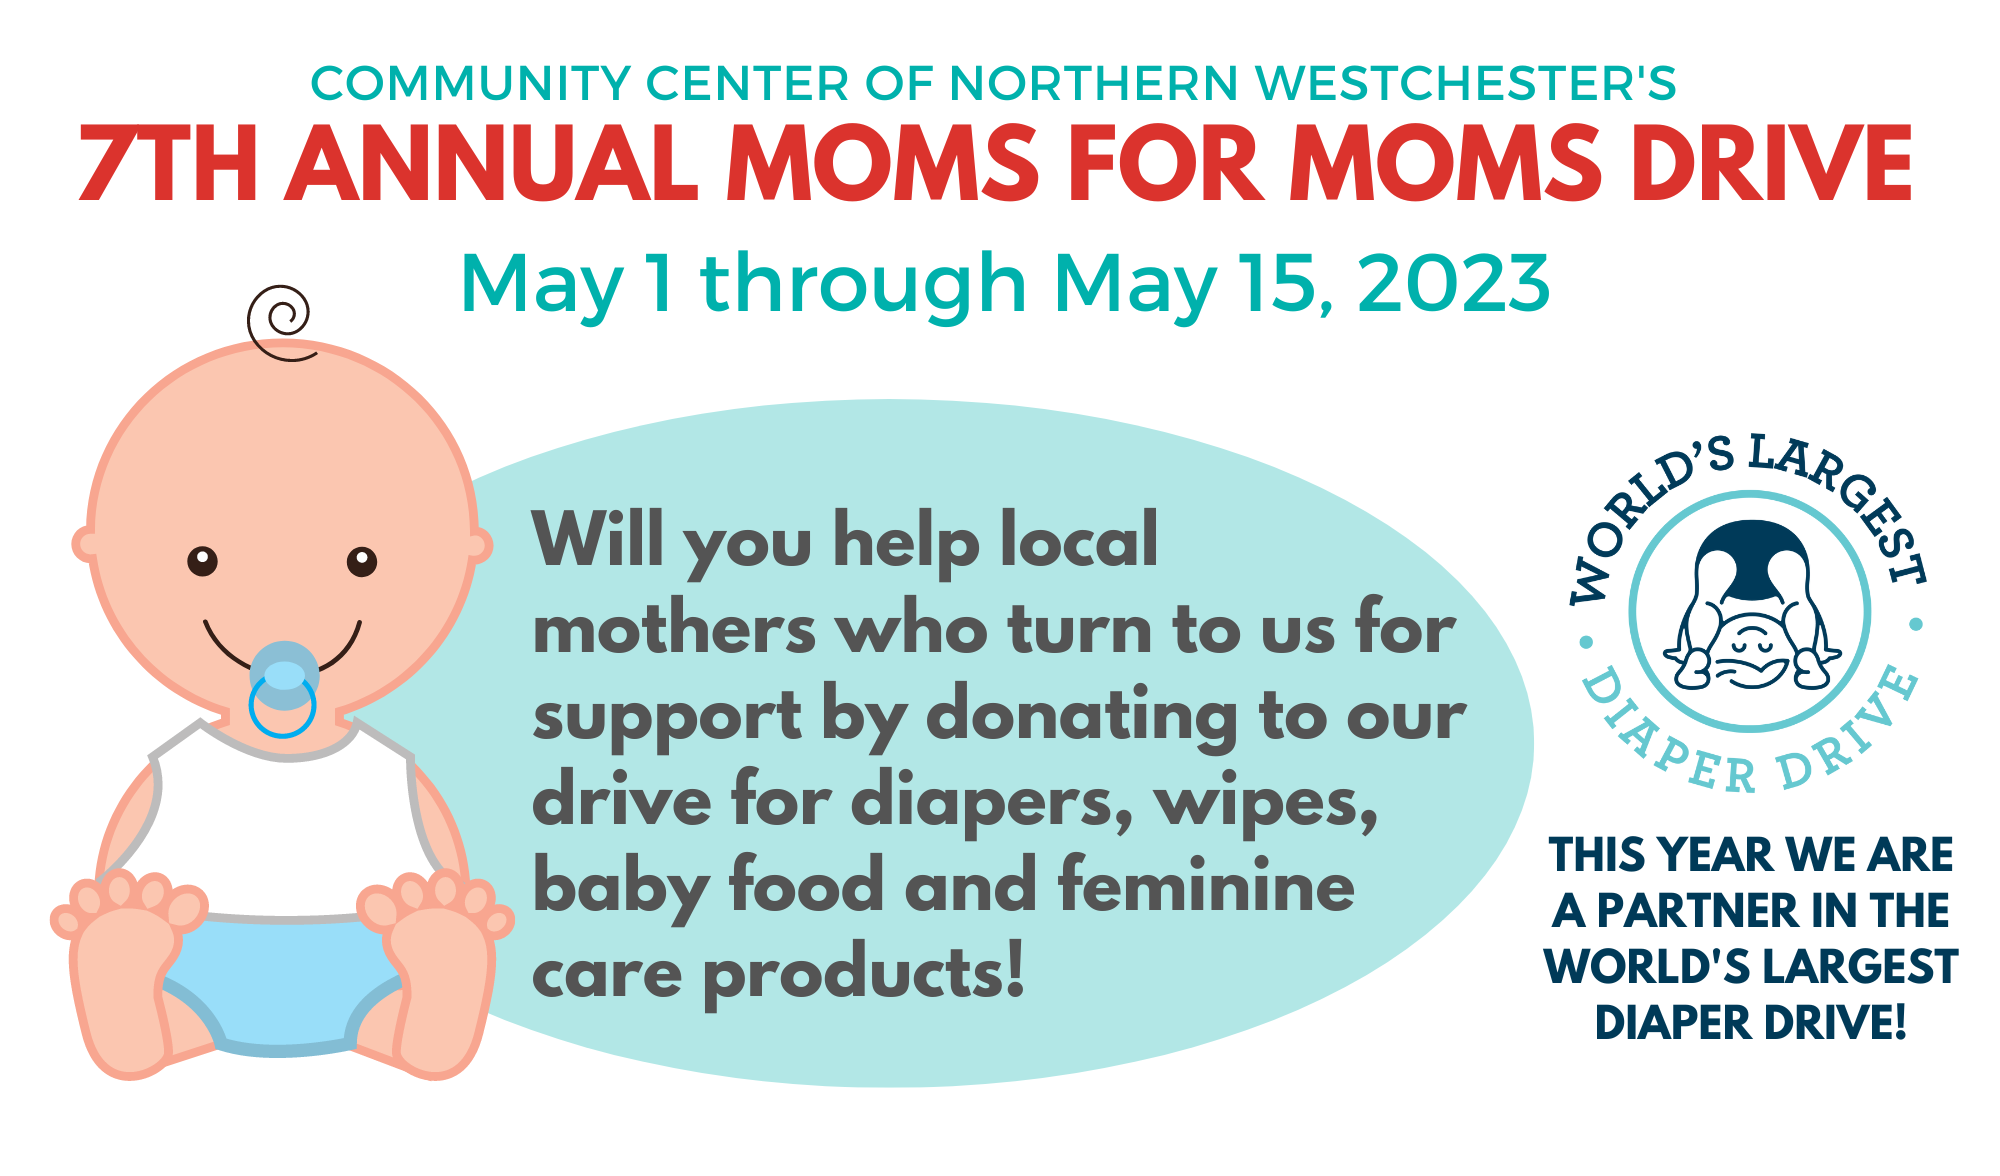 MOMS FOR MOMS BABY DRIVE  Community Center of Northern Westchester